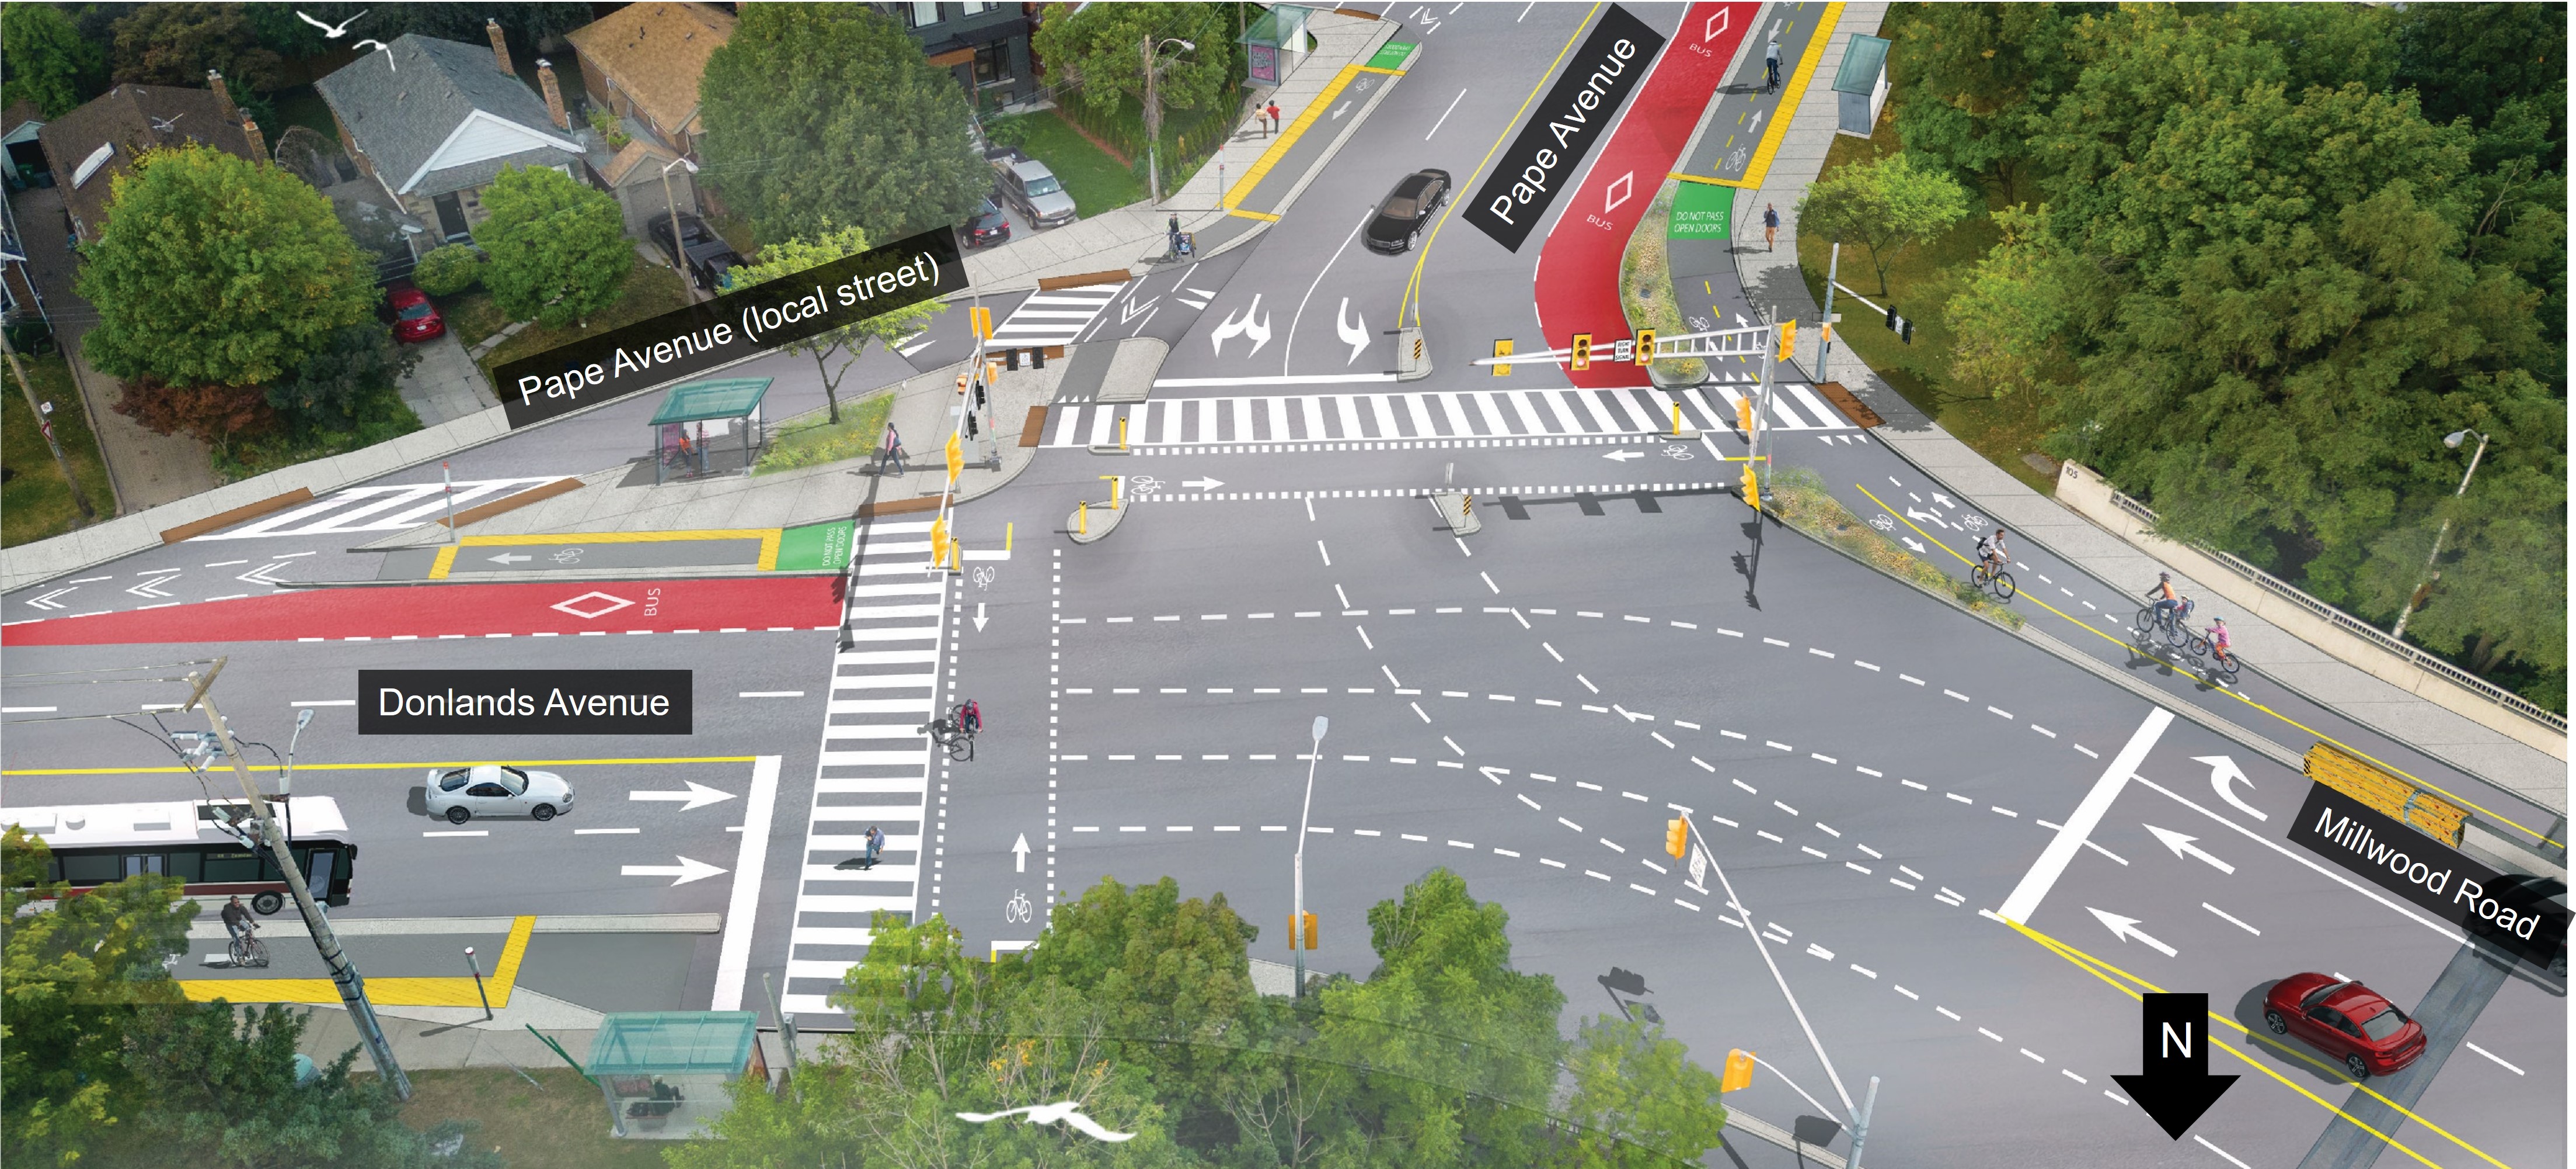 Proposed changes at Millwood Road at Pape Avenue & Donlands Avenue, including bikeways and improved amenities for bus riders and pedestrians.